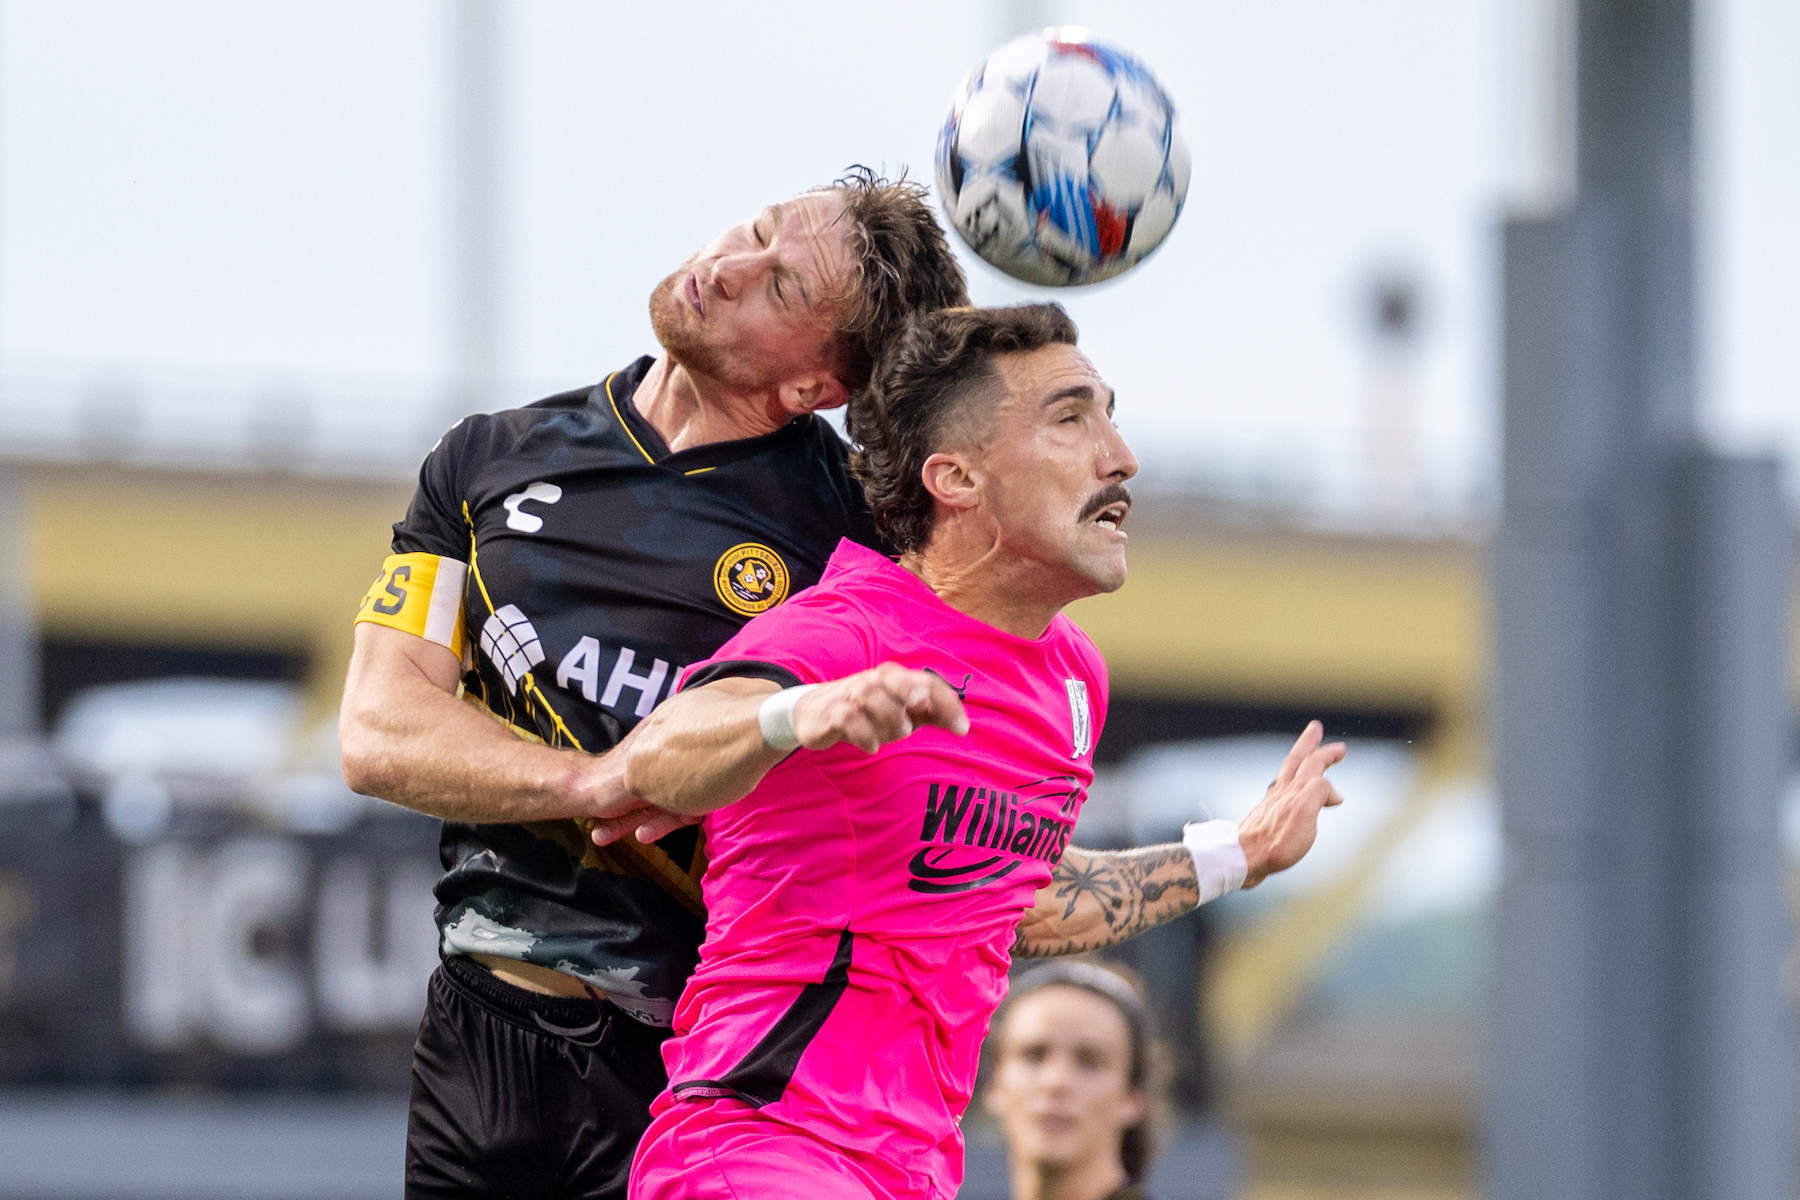 Pierre Cayet wins a header for the Hounds in their 1-0 loss to FC Tulsa in the U.S. Open Cup on May 7, 2024 at Highmark Stadium. (Photo: Chris Cowger/Riverhounds SC)